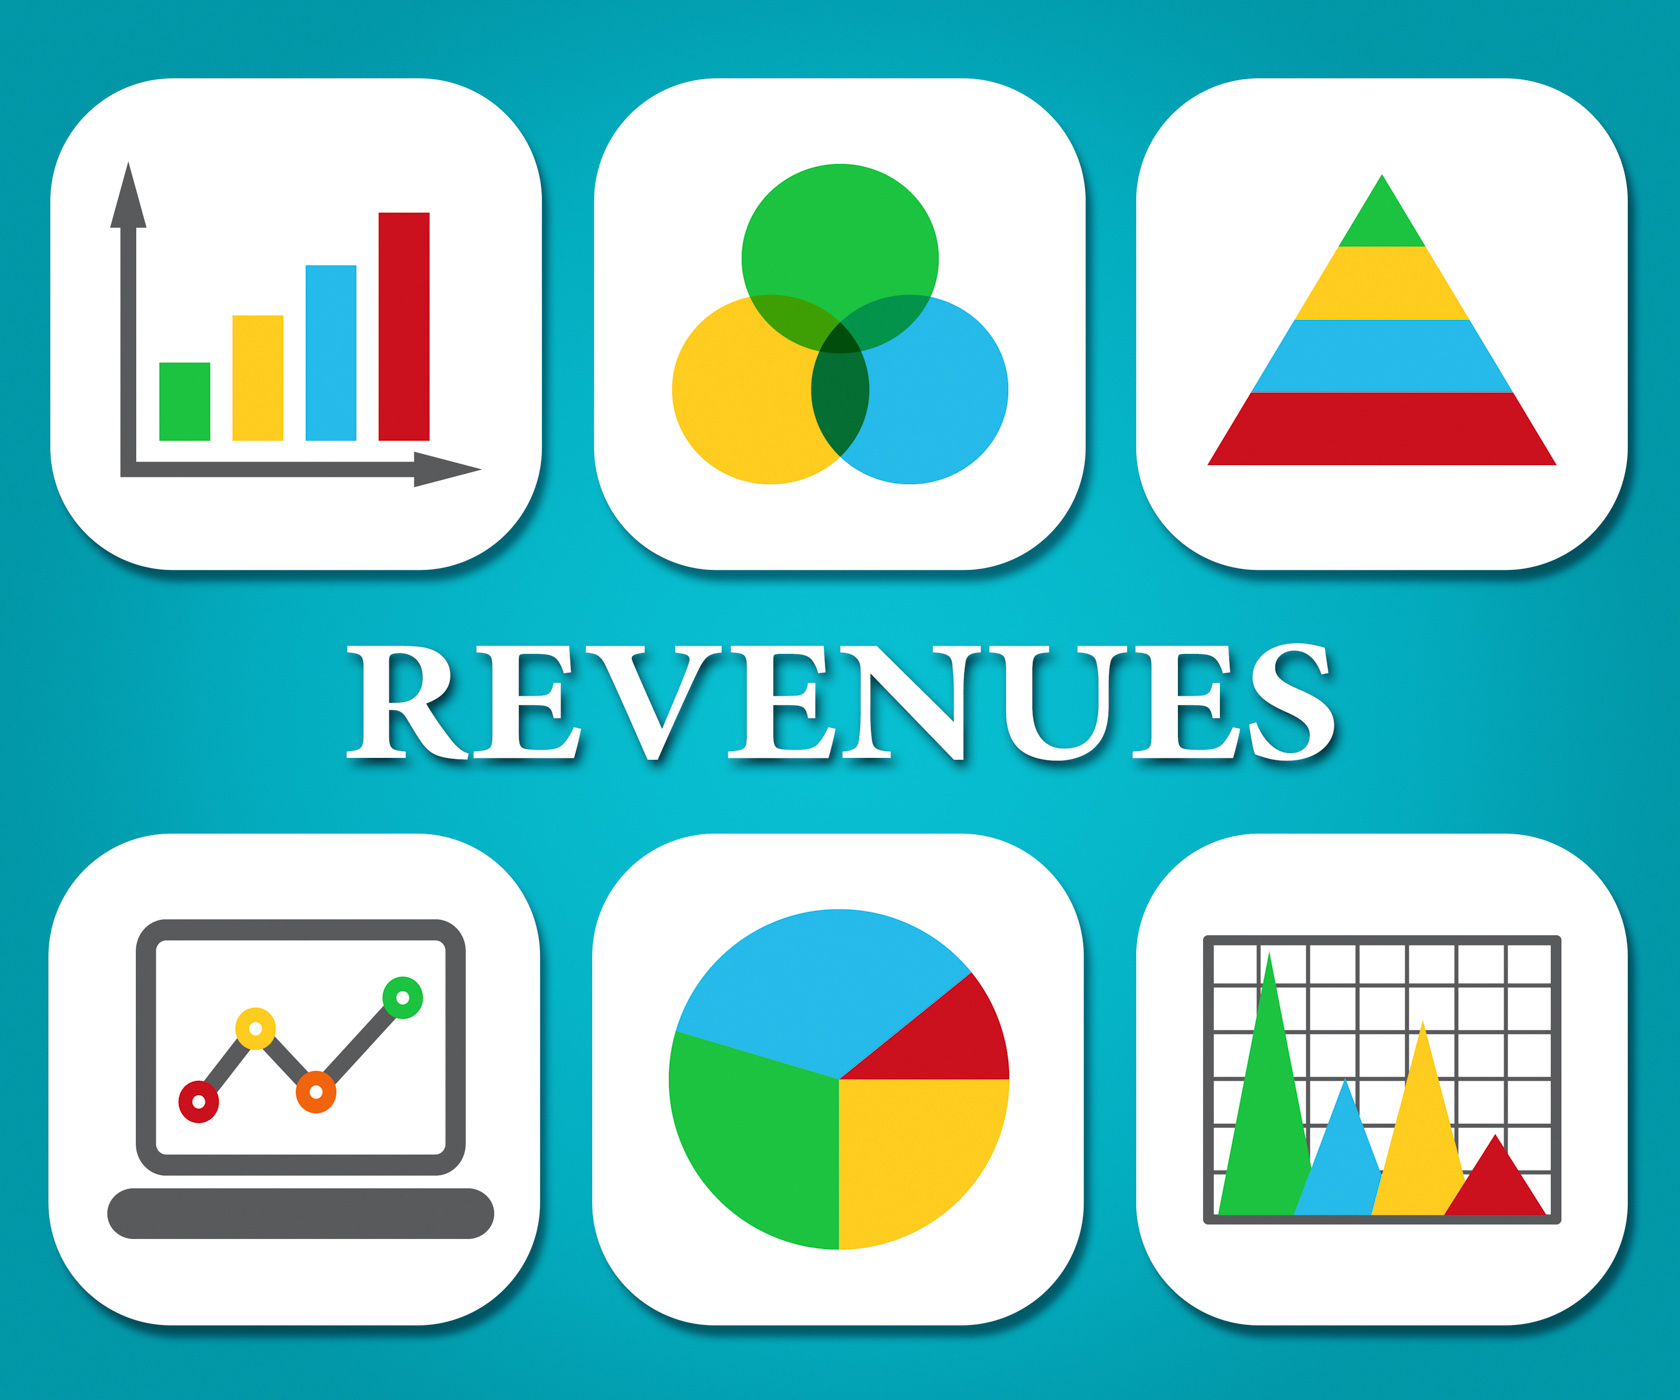 Revenues charts represents business graph and salary photo